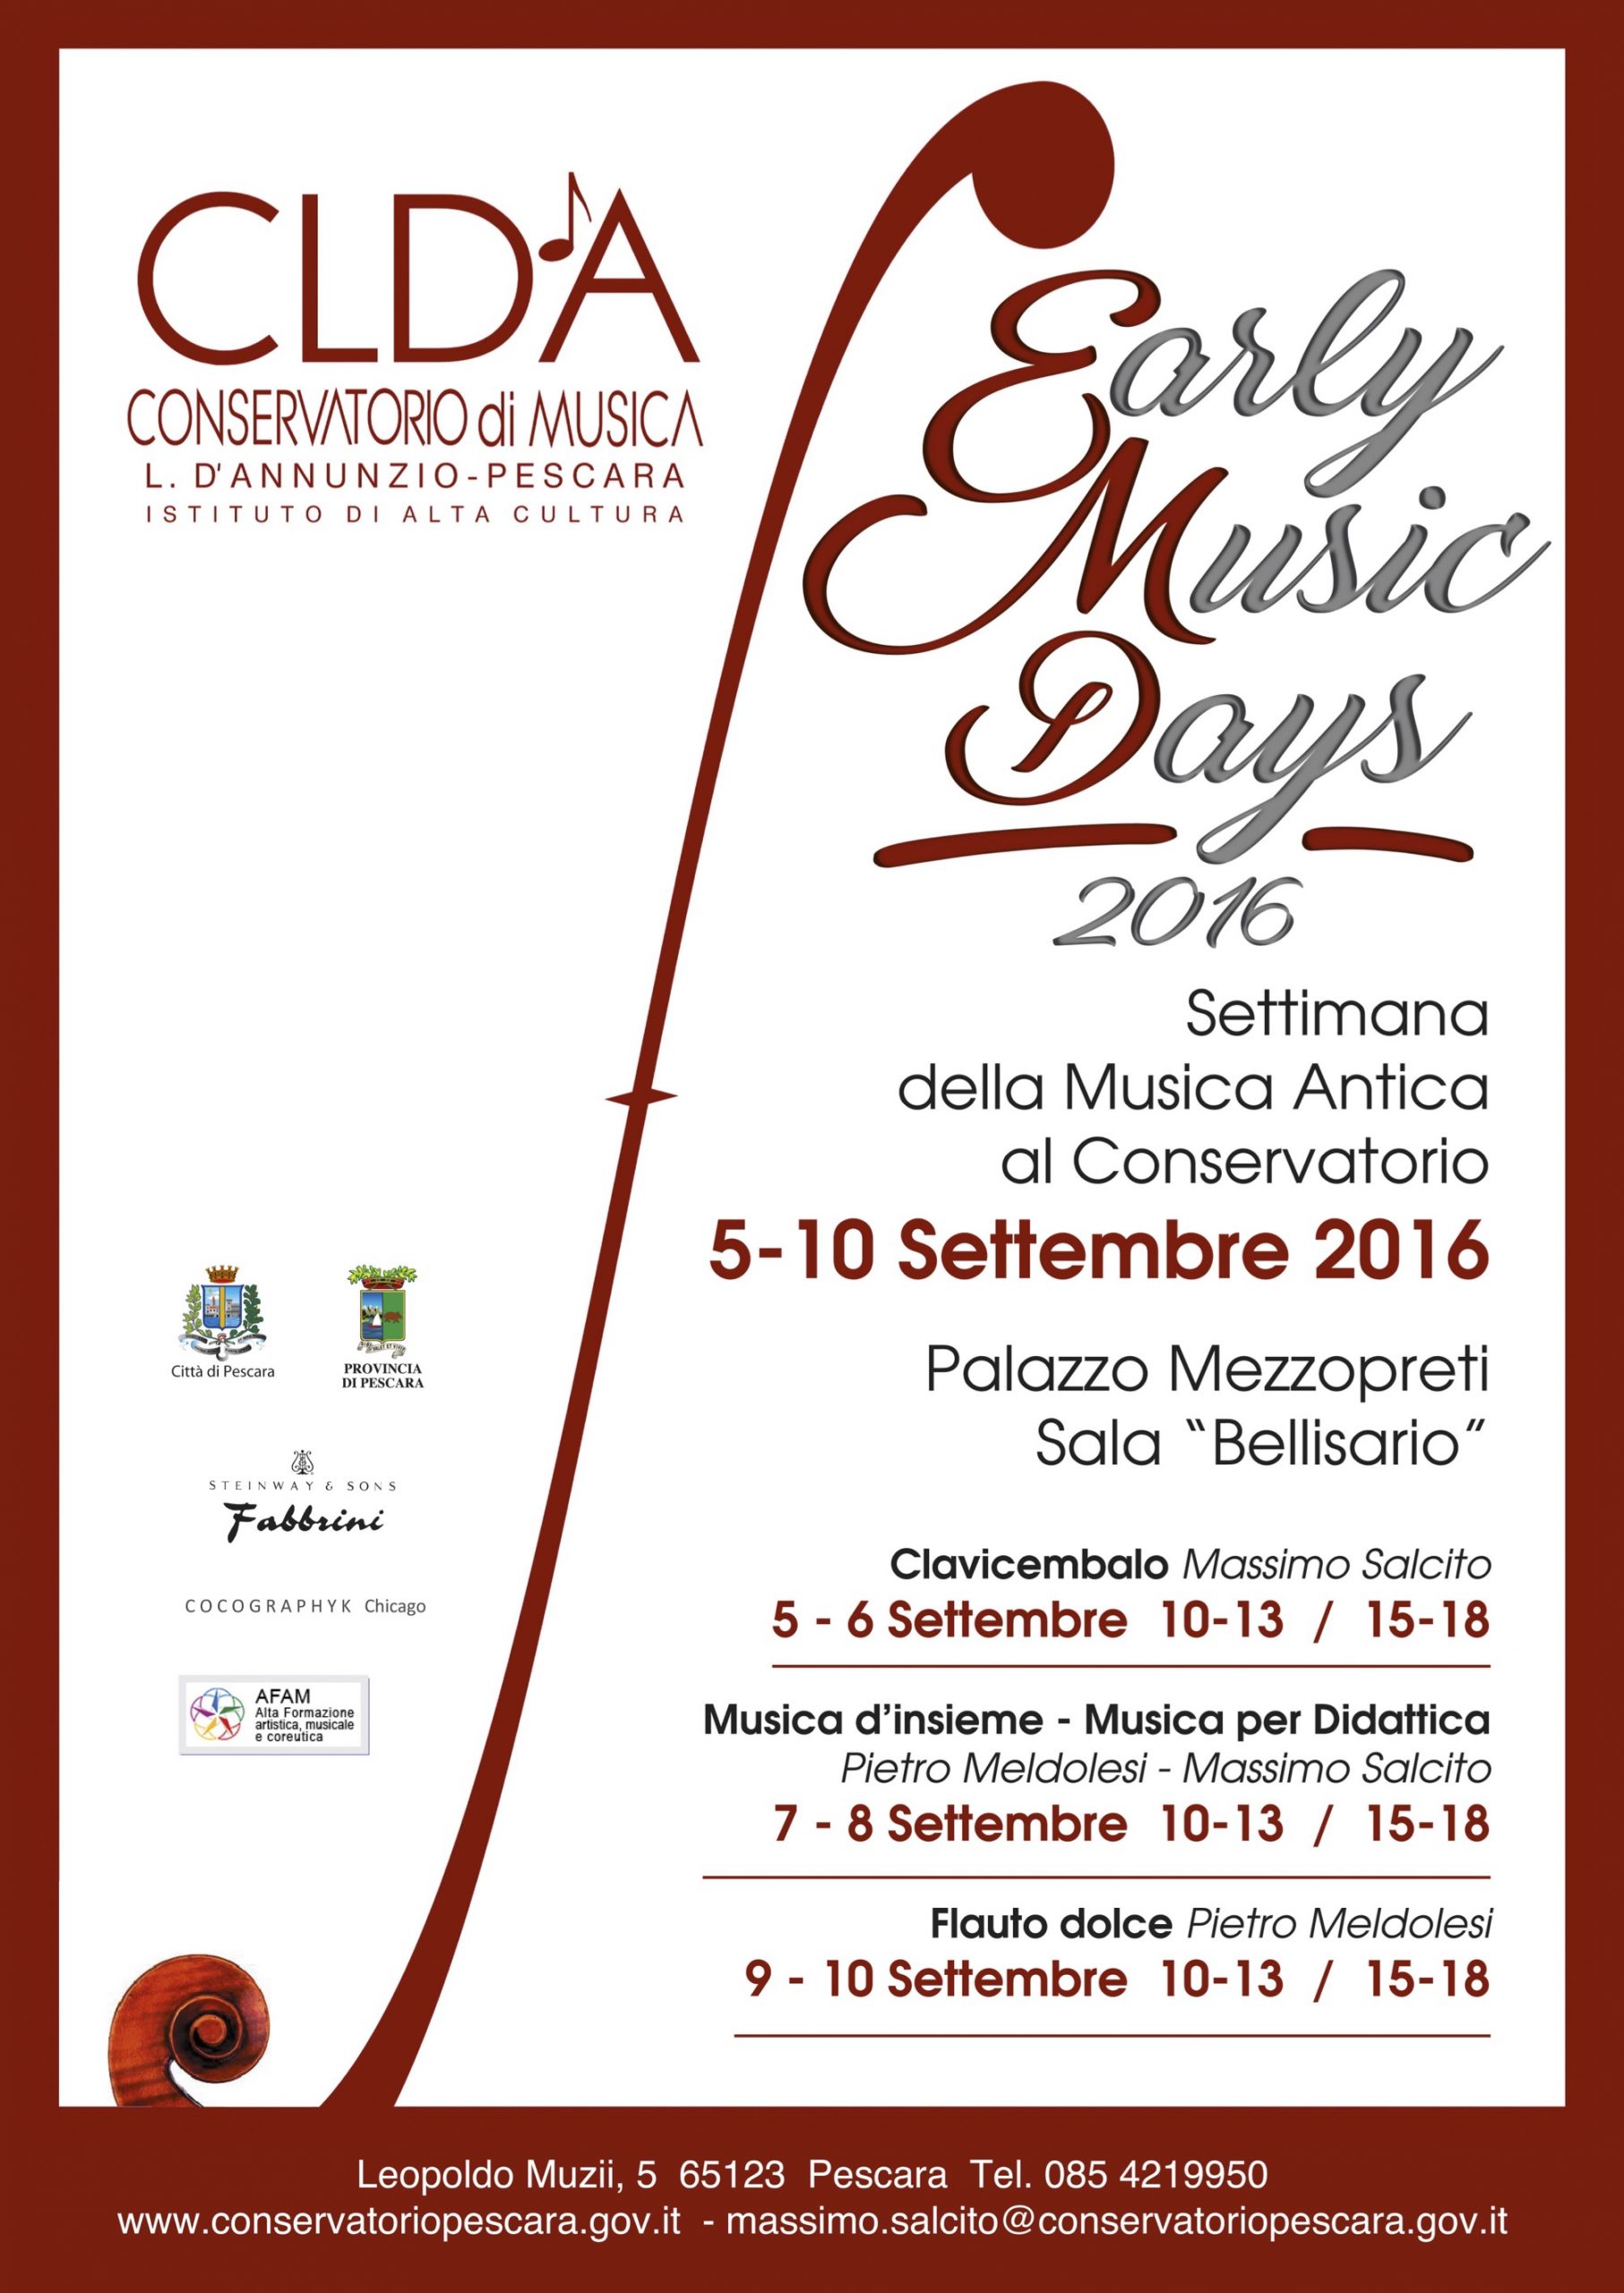 Early Music Days 2016 